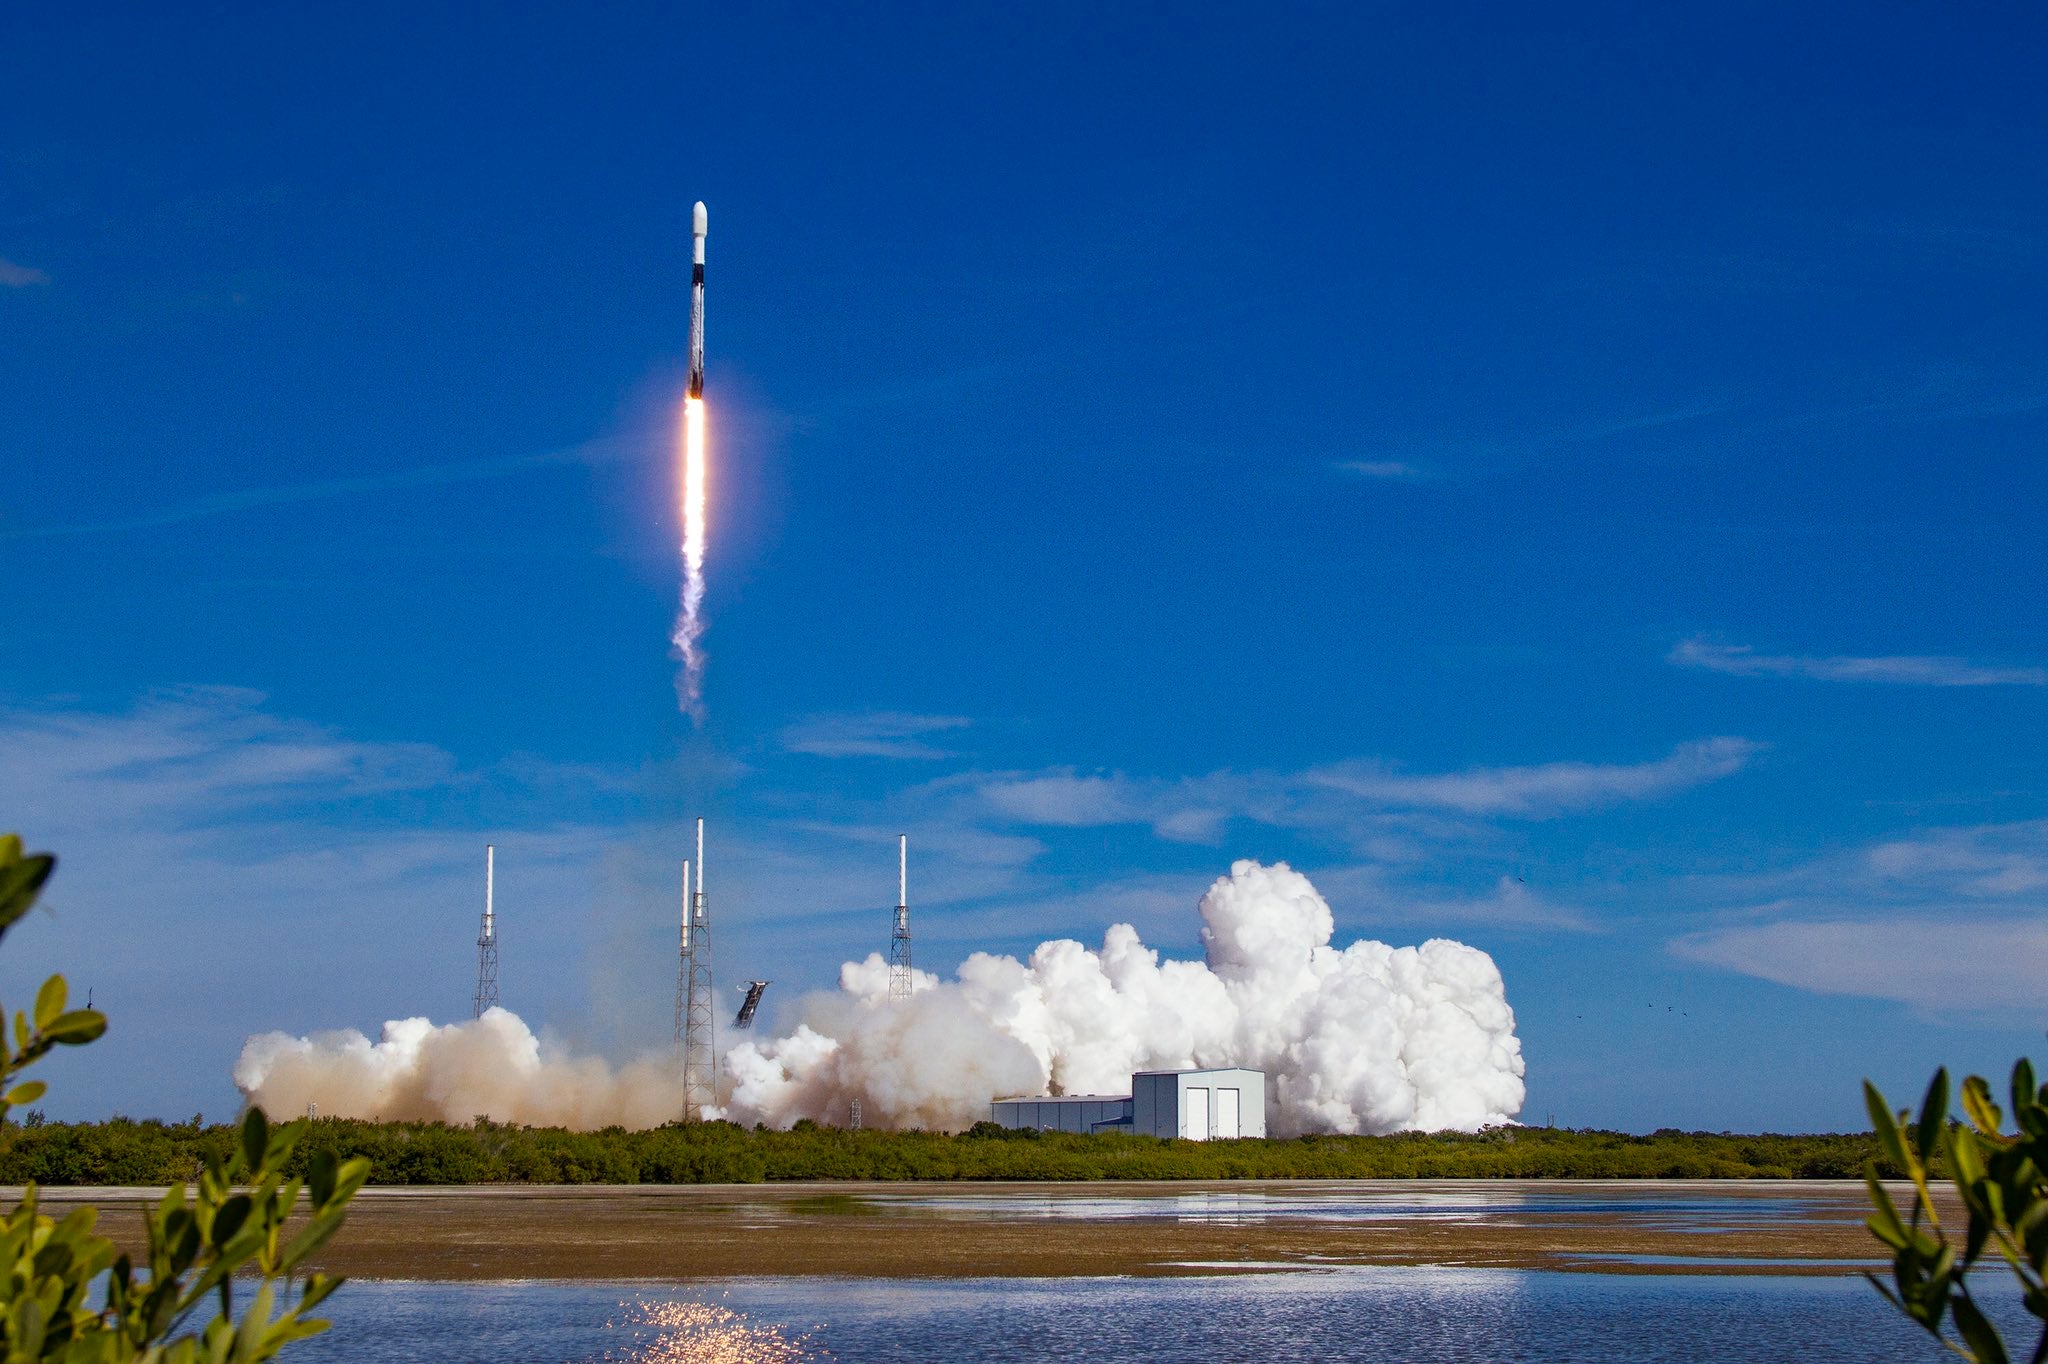 SpaceX earns $150.4 million from the U.S. Department of Defense to deploy satellites